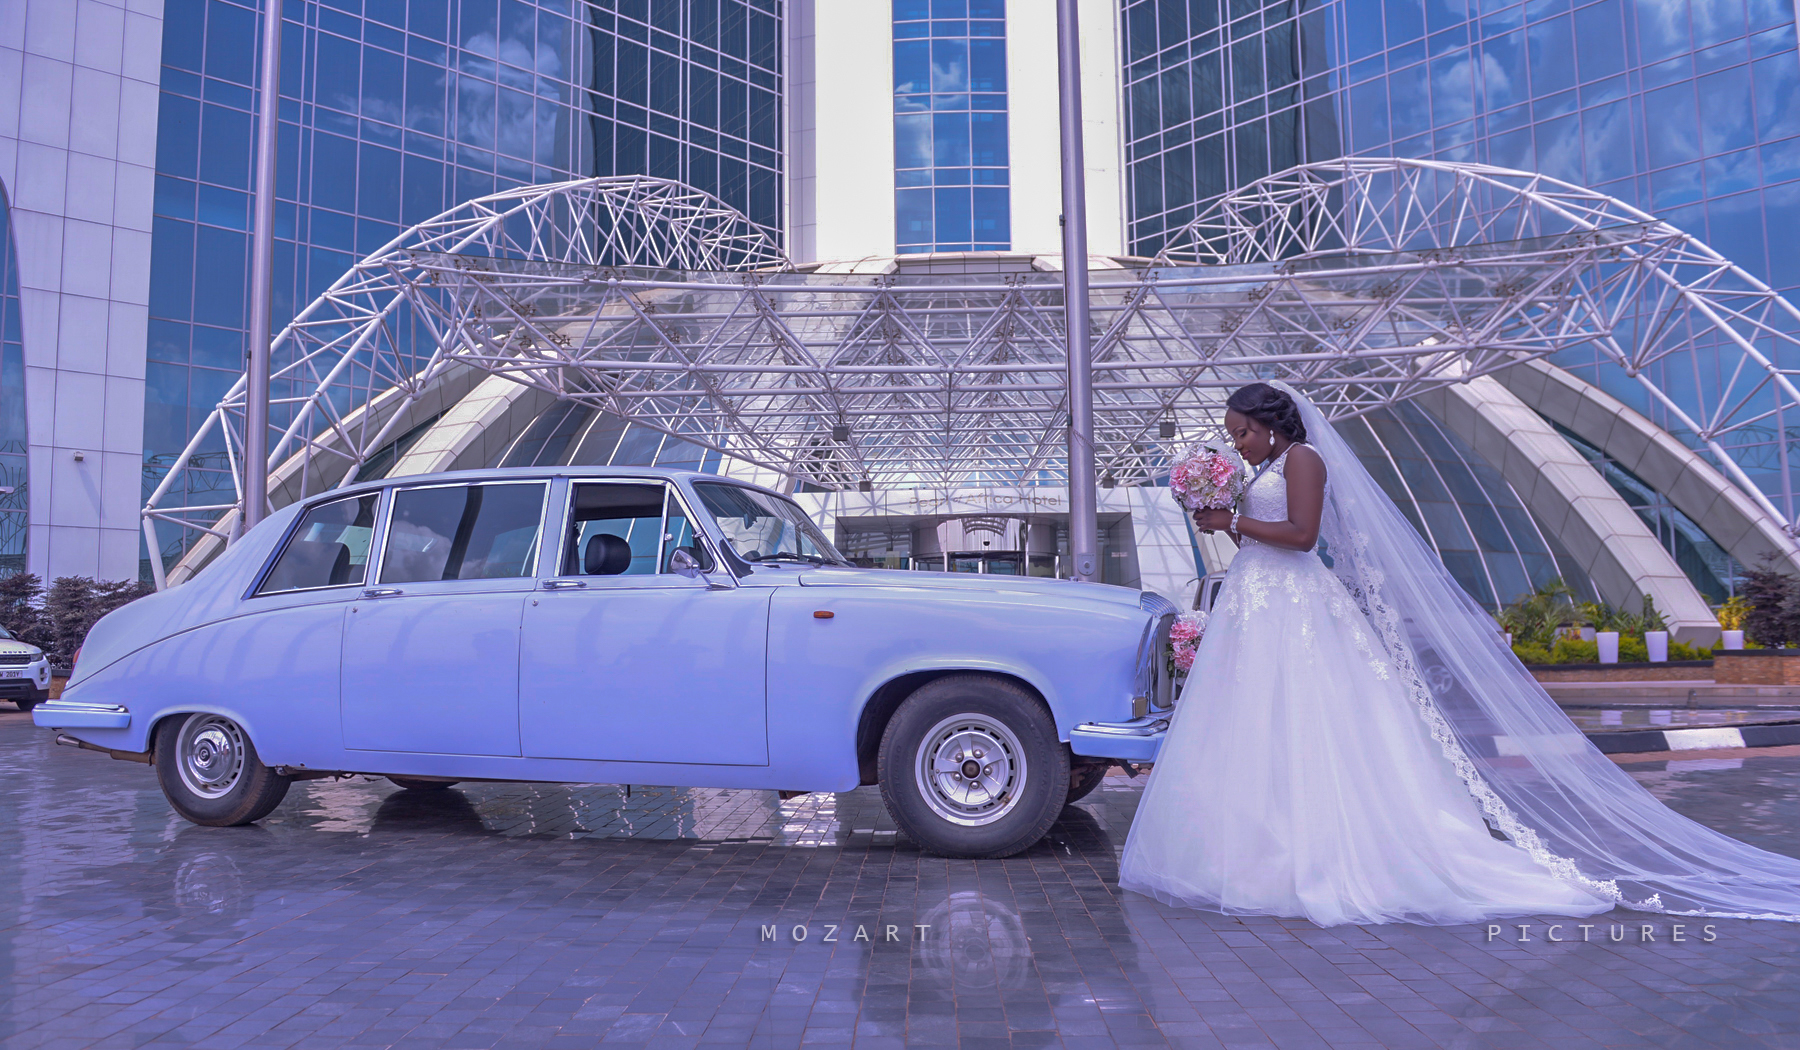 Meha's wedding photo shoot by Mozart Pictures at the Pearl of Africa Hotel in Nakasero